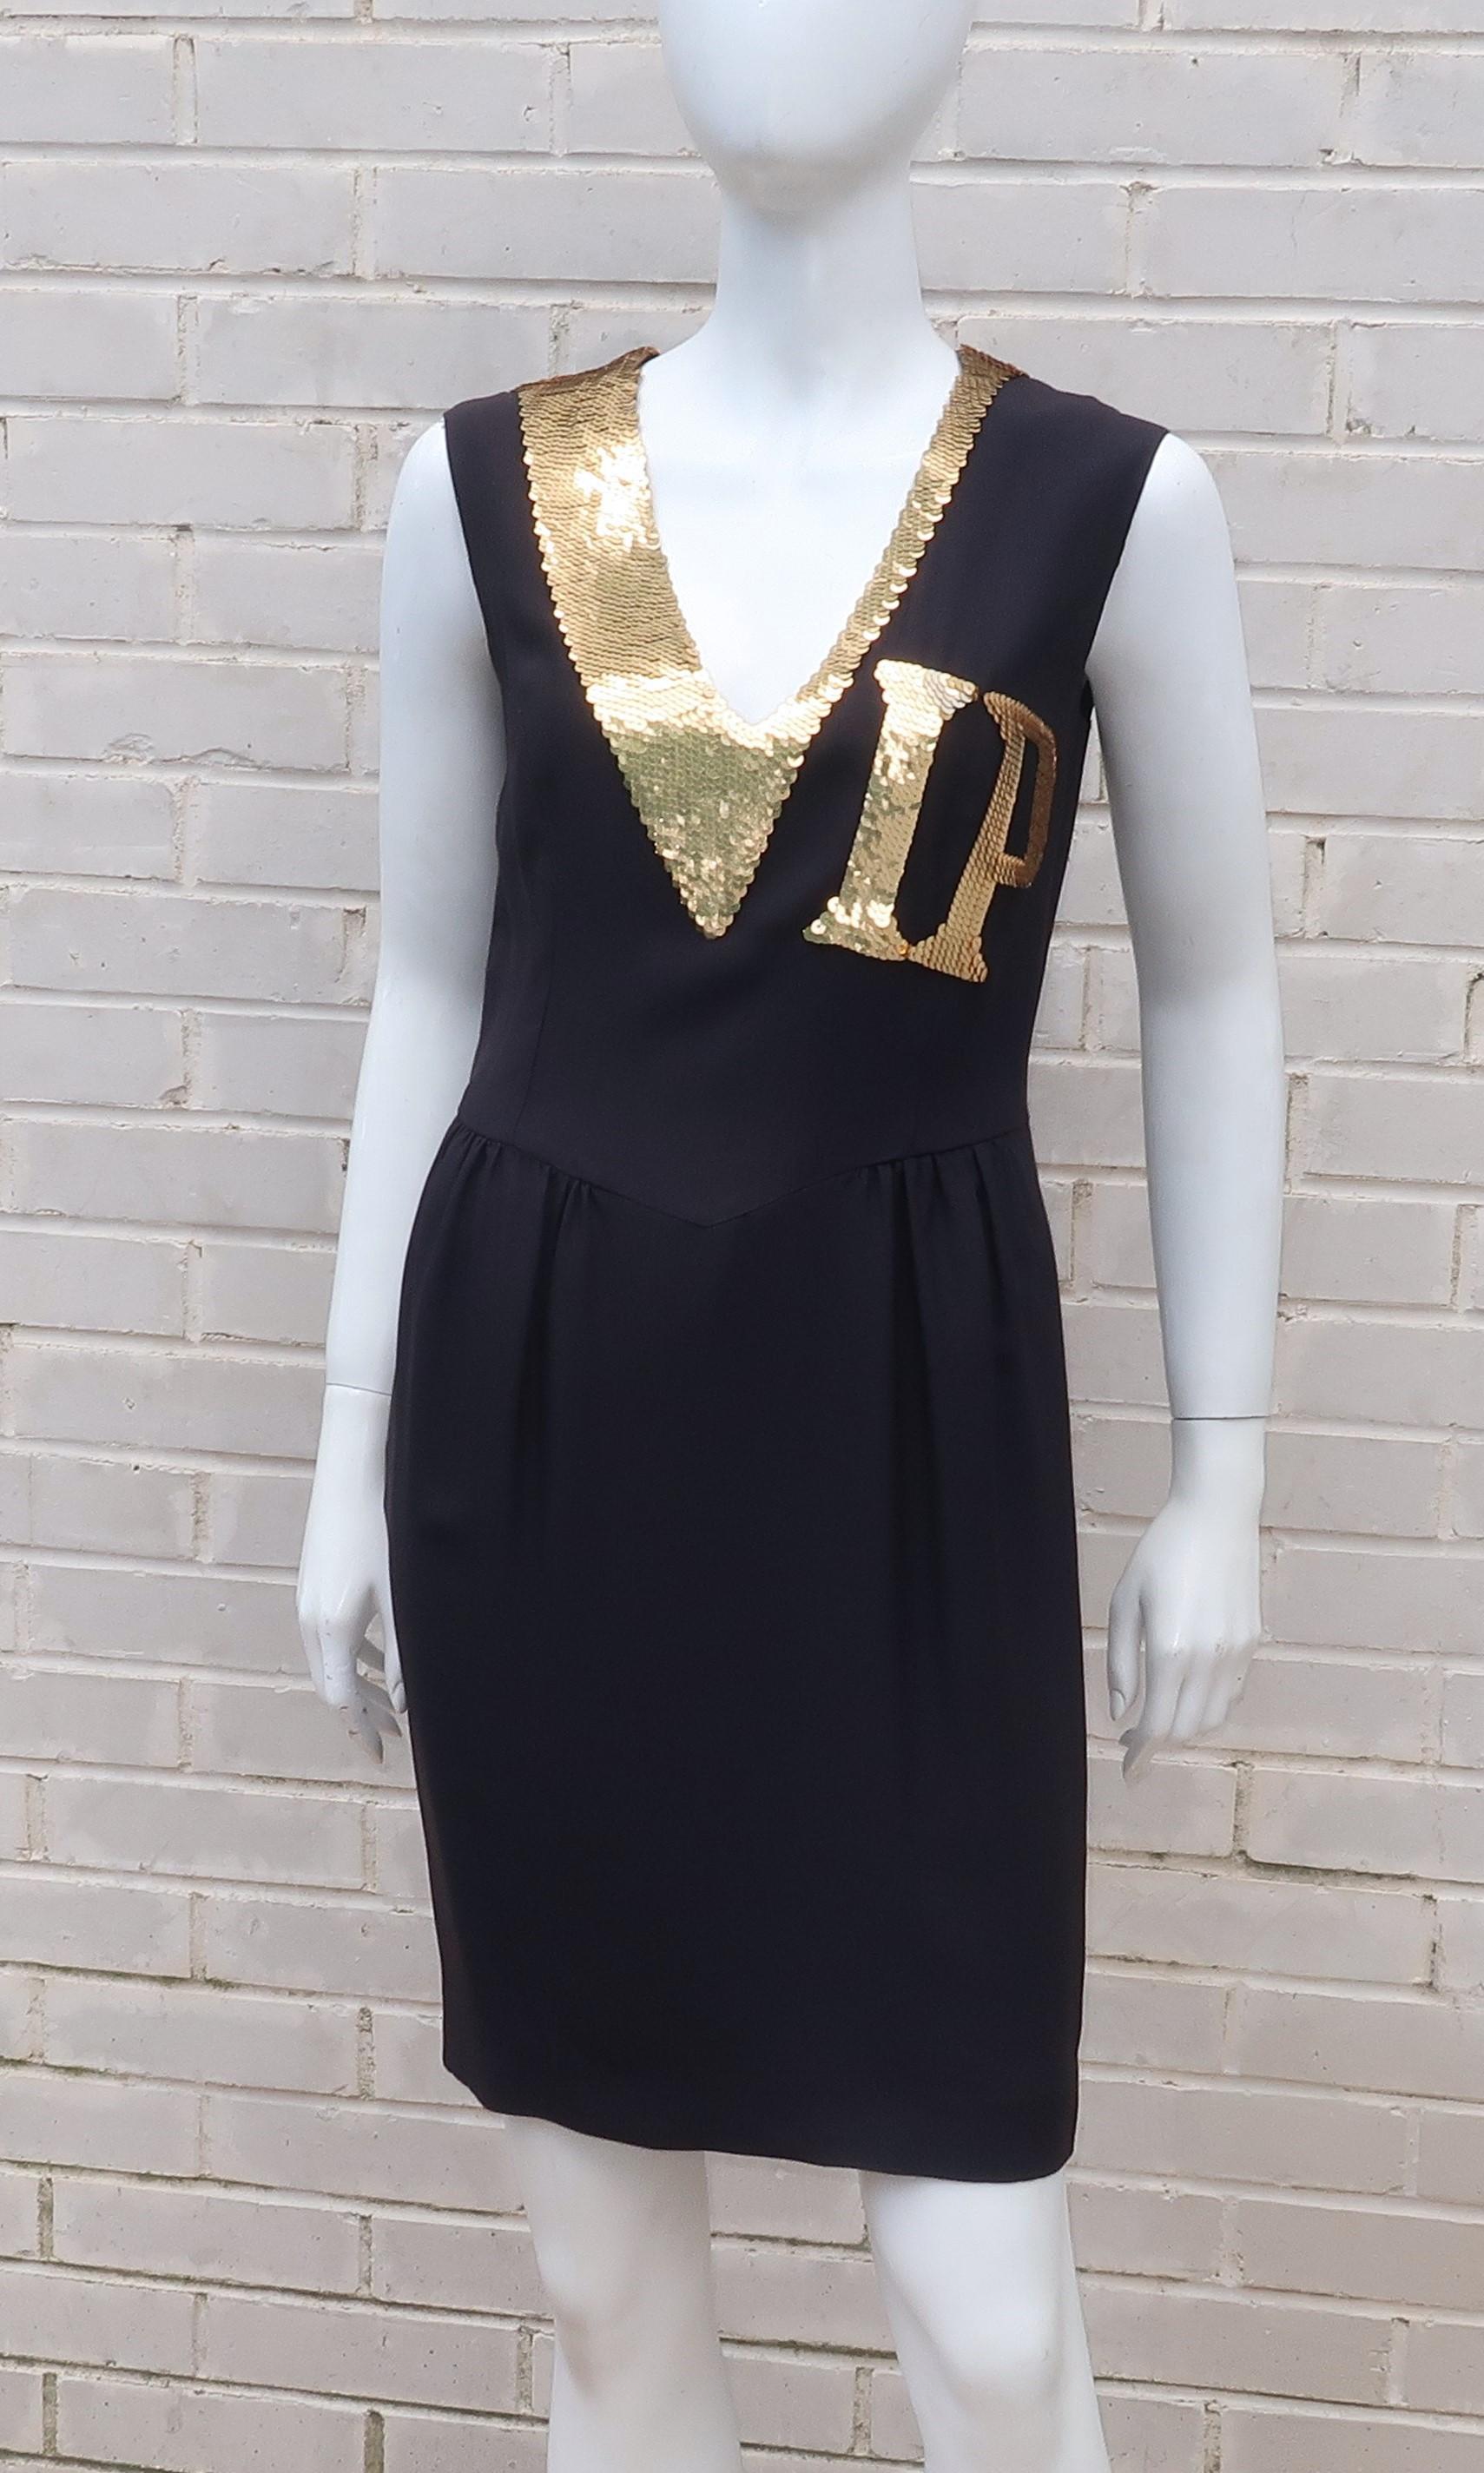 Moschino has got your pass!  In keeping with his irreverent style, Franco Moschino’s black rayon cocktail dress announces VIP status in gold sequins with the intent of framing the wearer’s face in style.  The sleeveless silhouette zips and hooks at